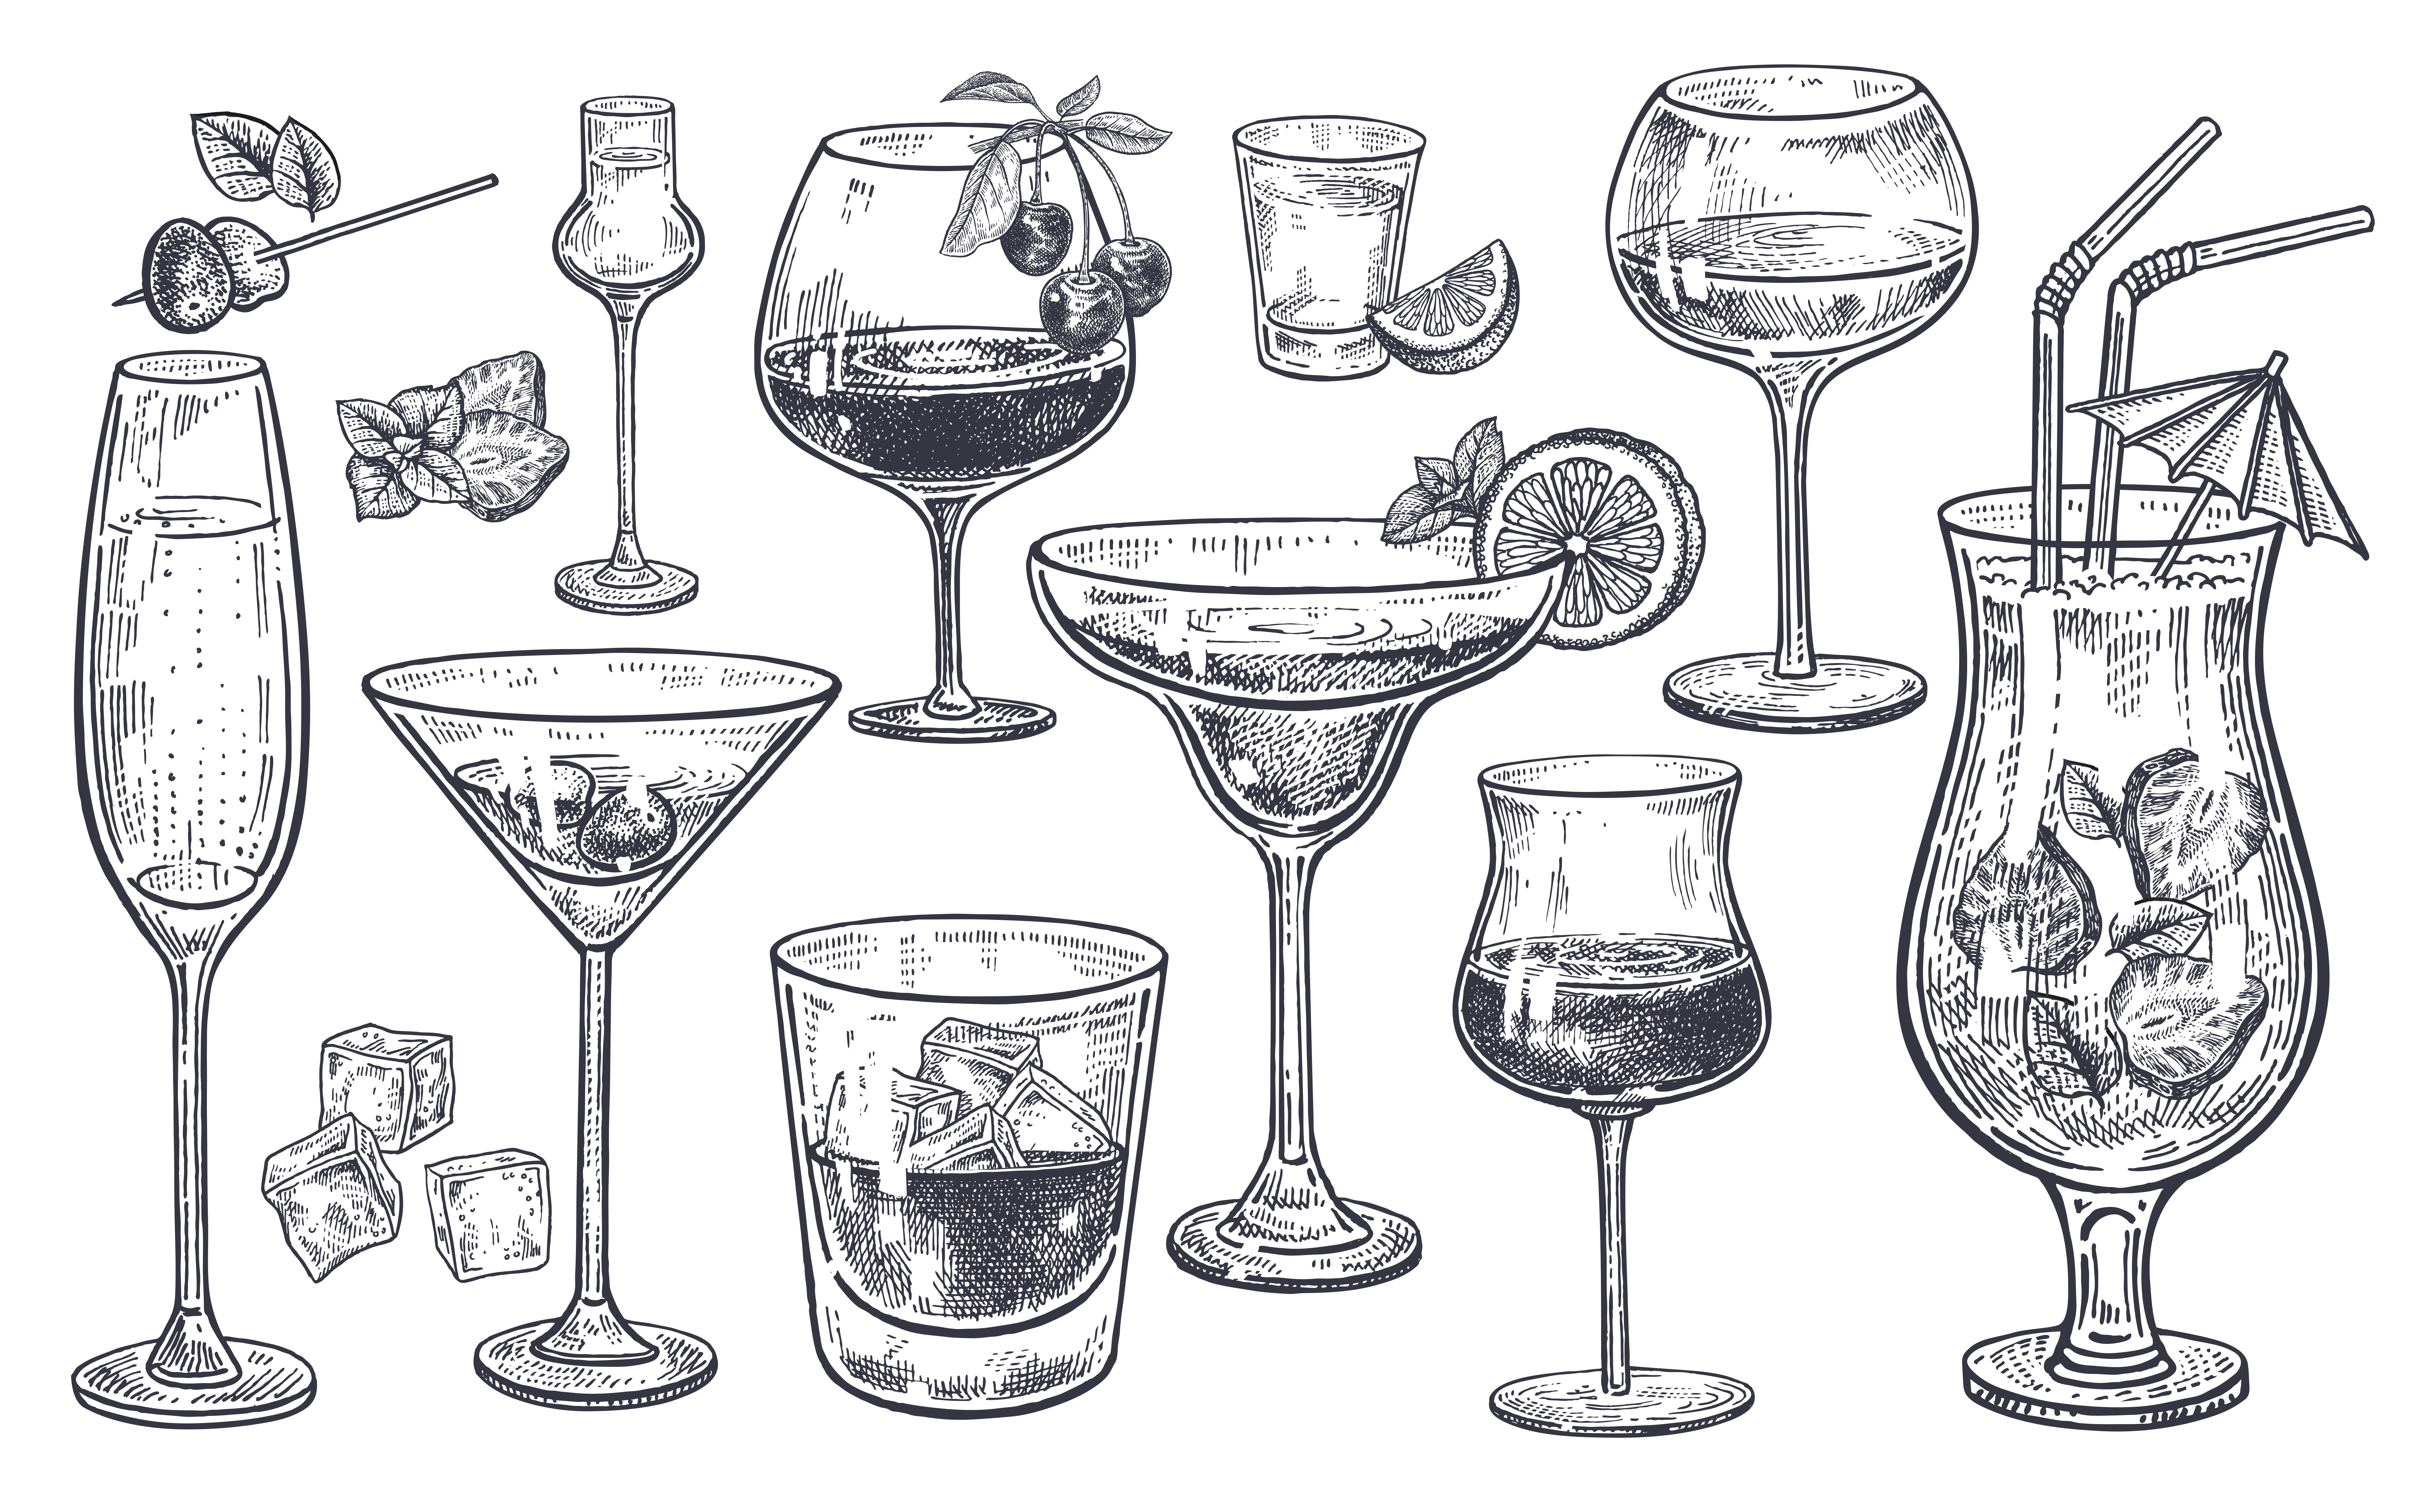 Black sketches of various wine, cocktail, and martini glasses on white background to symbolize a member mixer